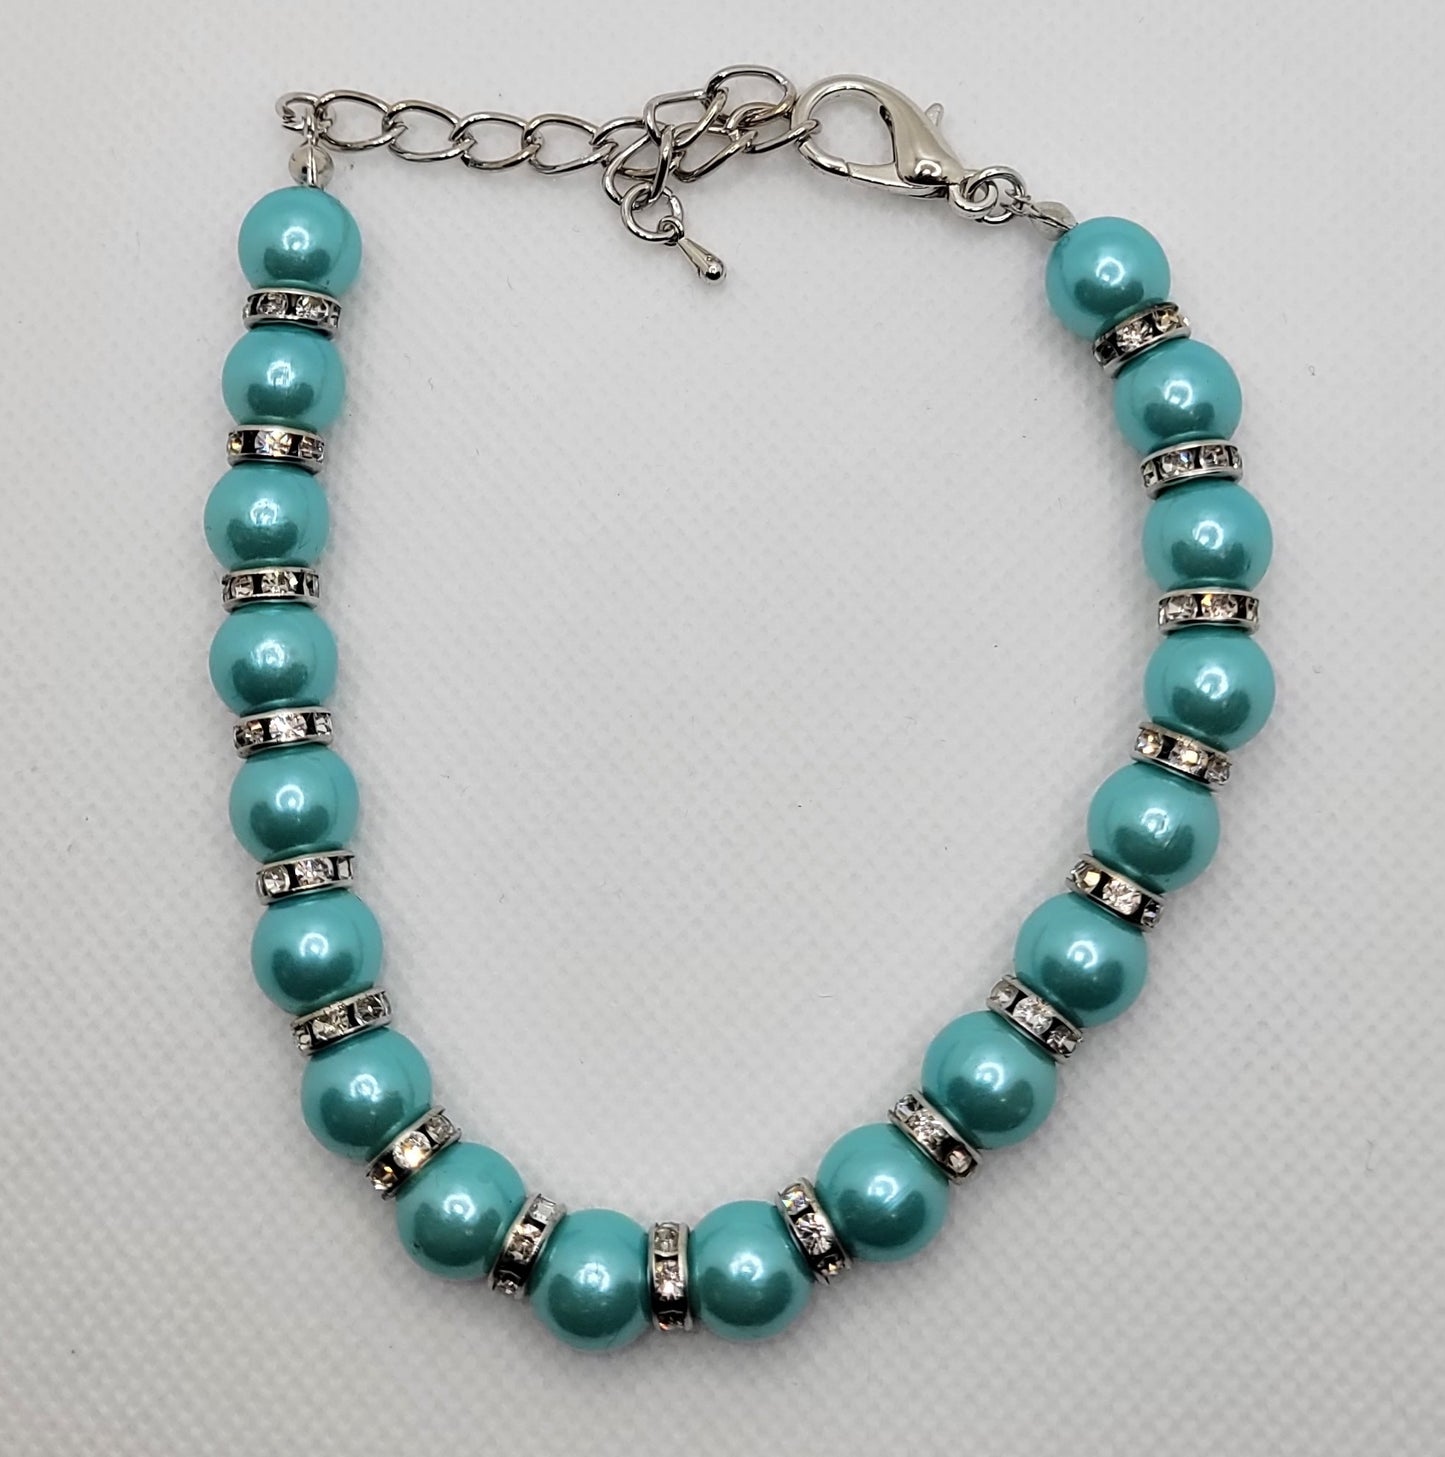 Teal Pearl Studded Silver Chain - Item #: 029